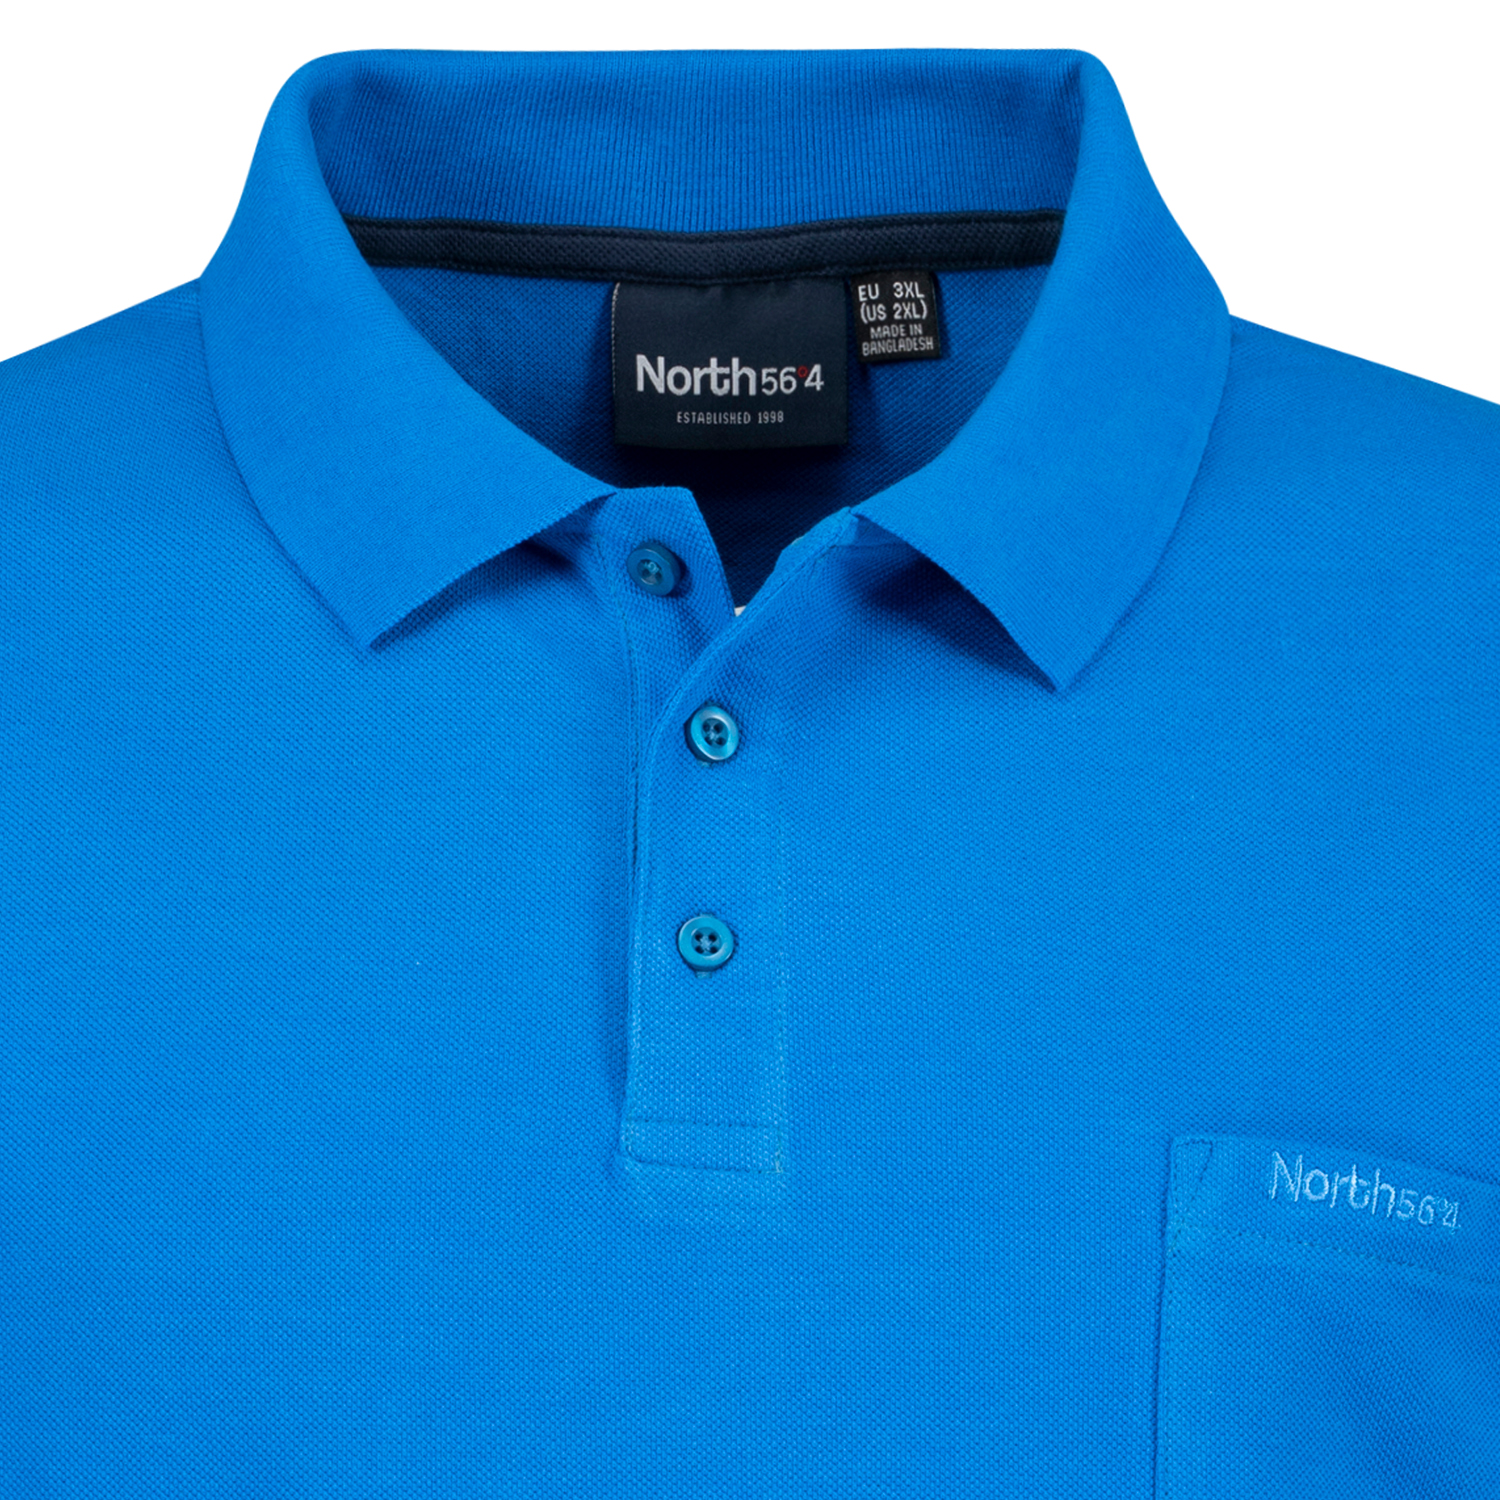 Steel blue pique poloshirt for men by Greyes/North 56°4 in oversizes up to 8XL